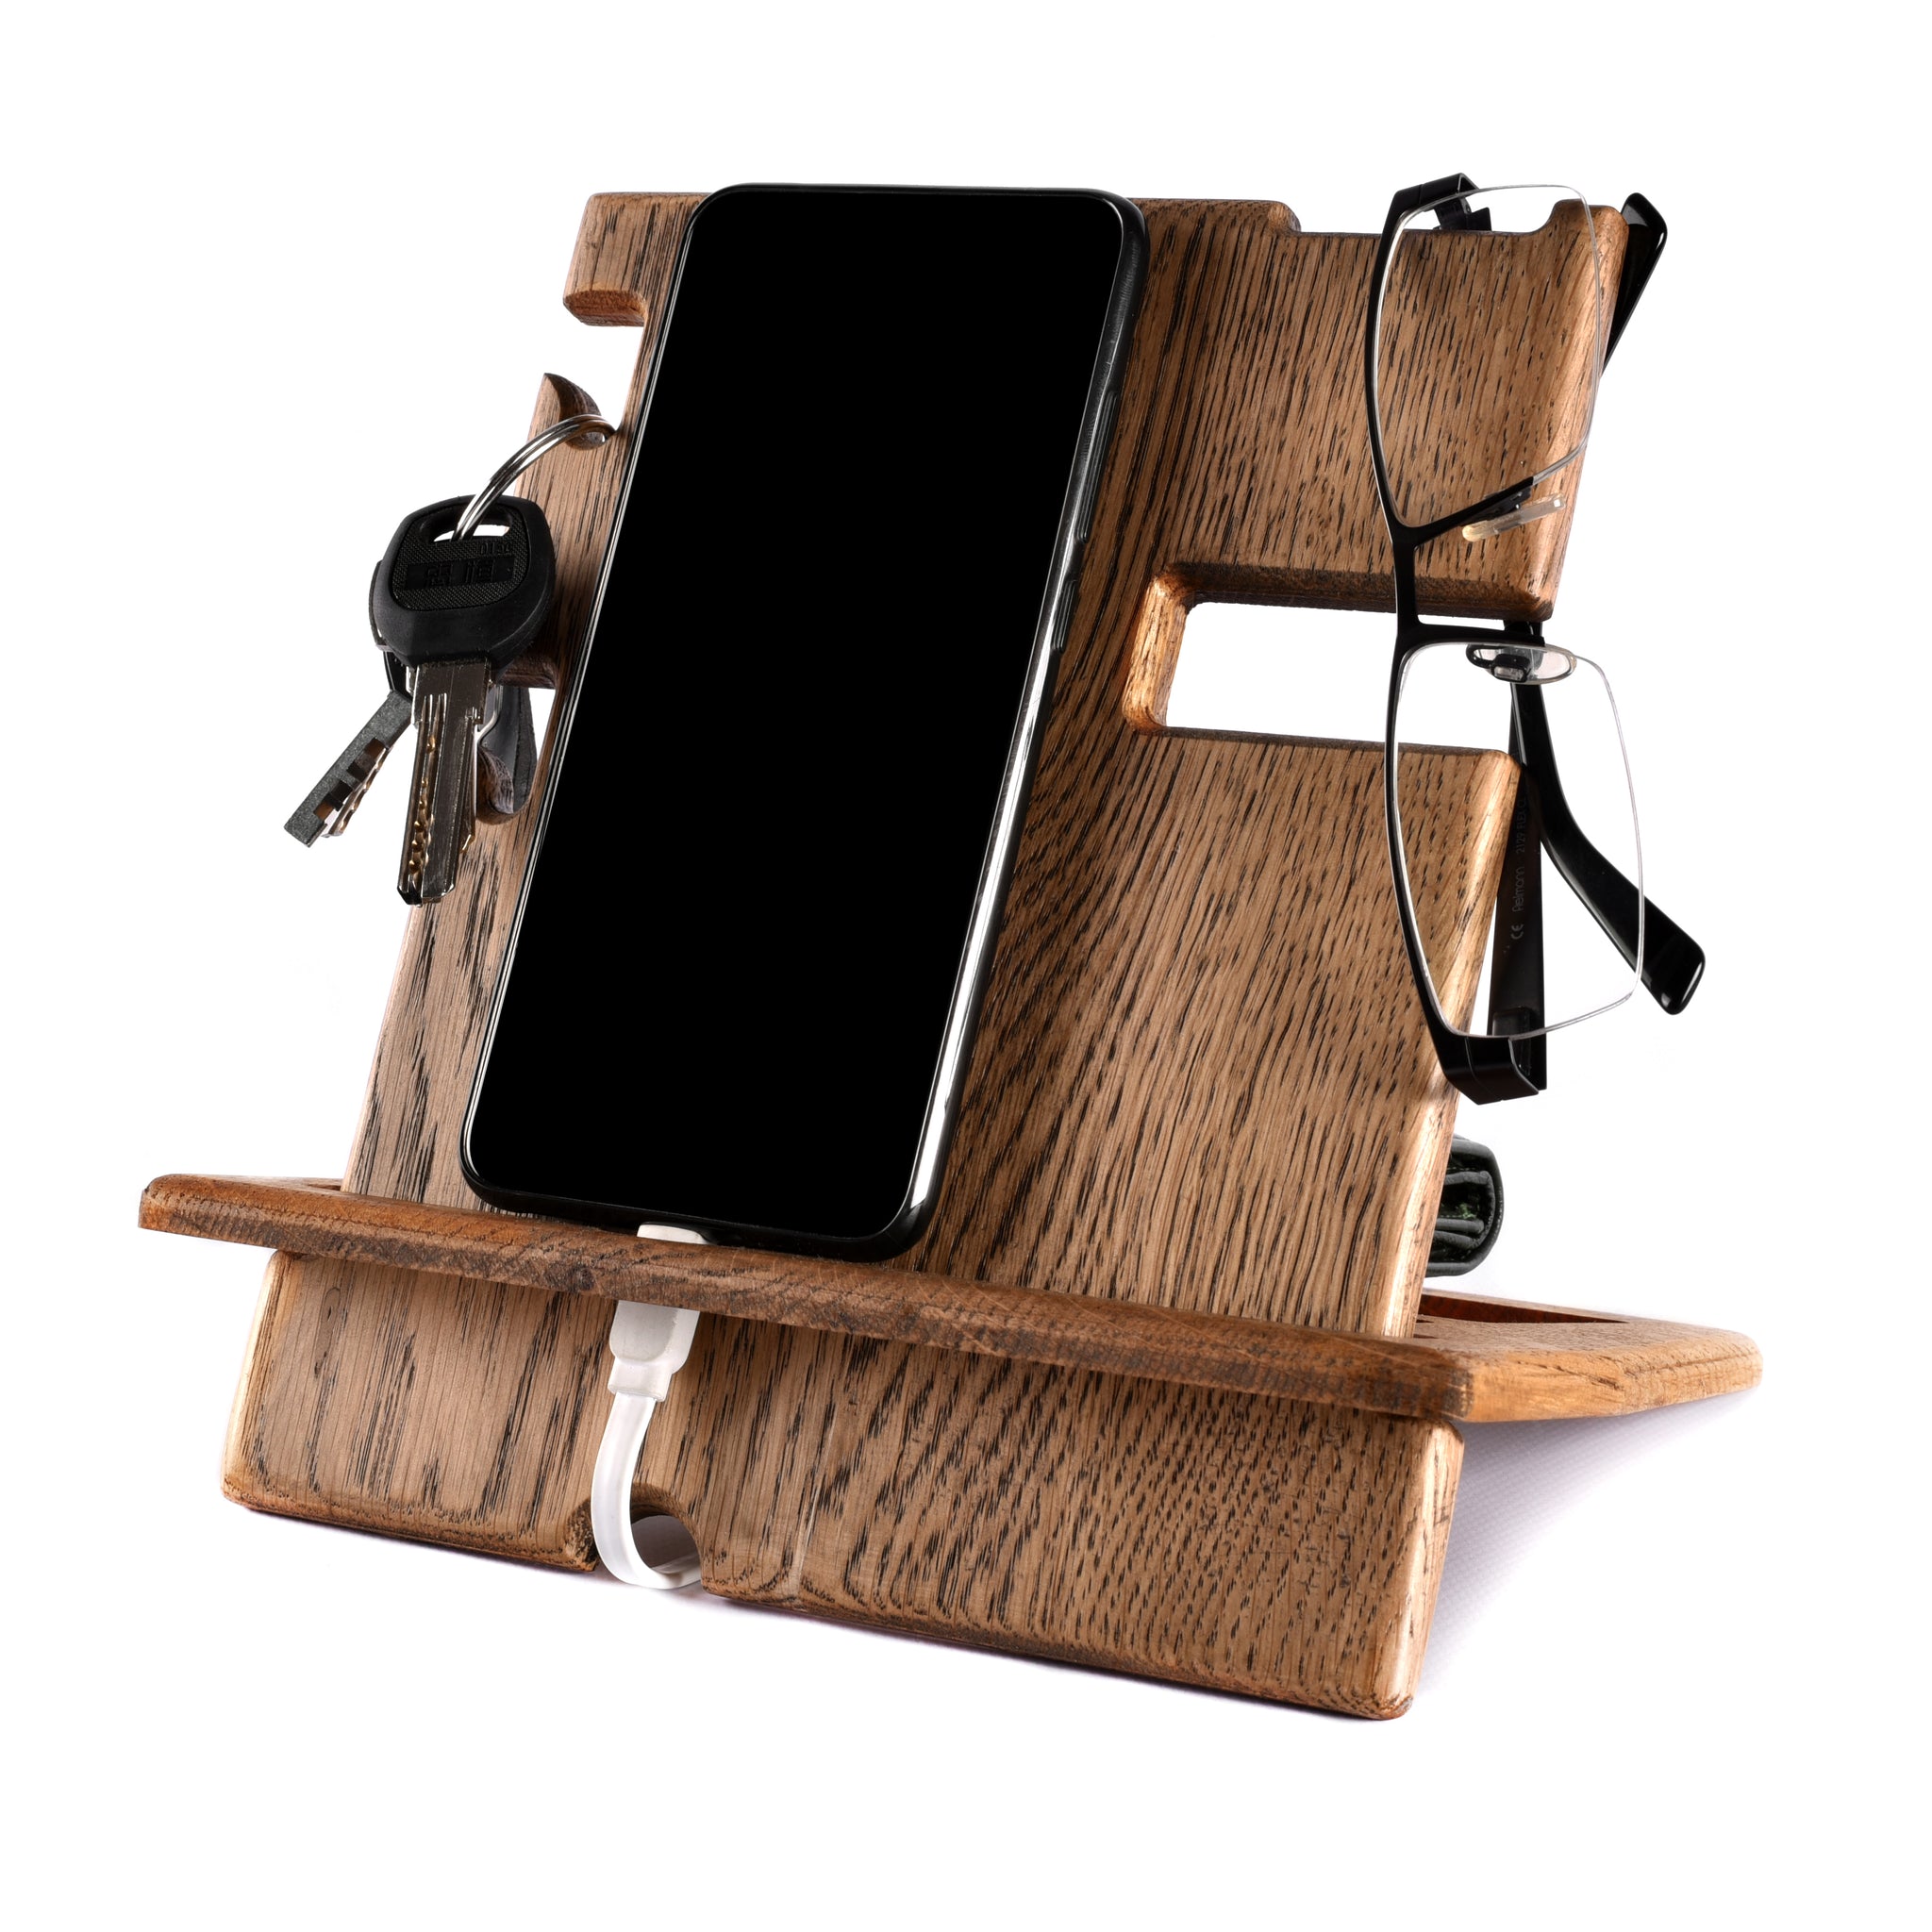 The best gift for him idea: Wooden Phone Stand, Desk Organizer